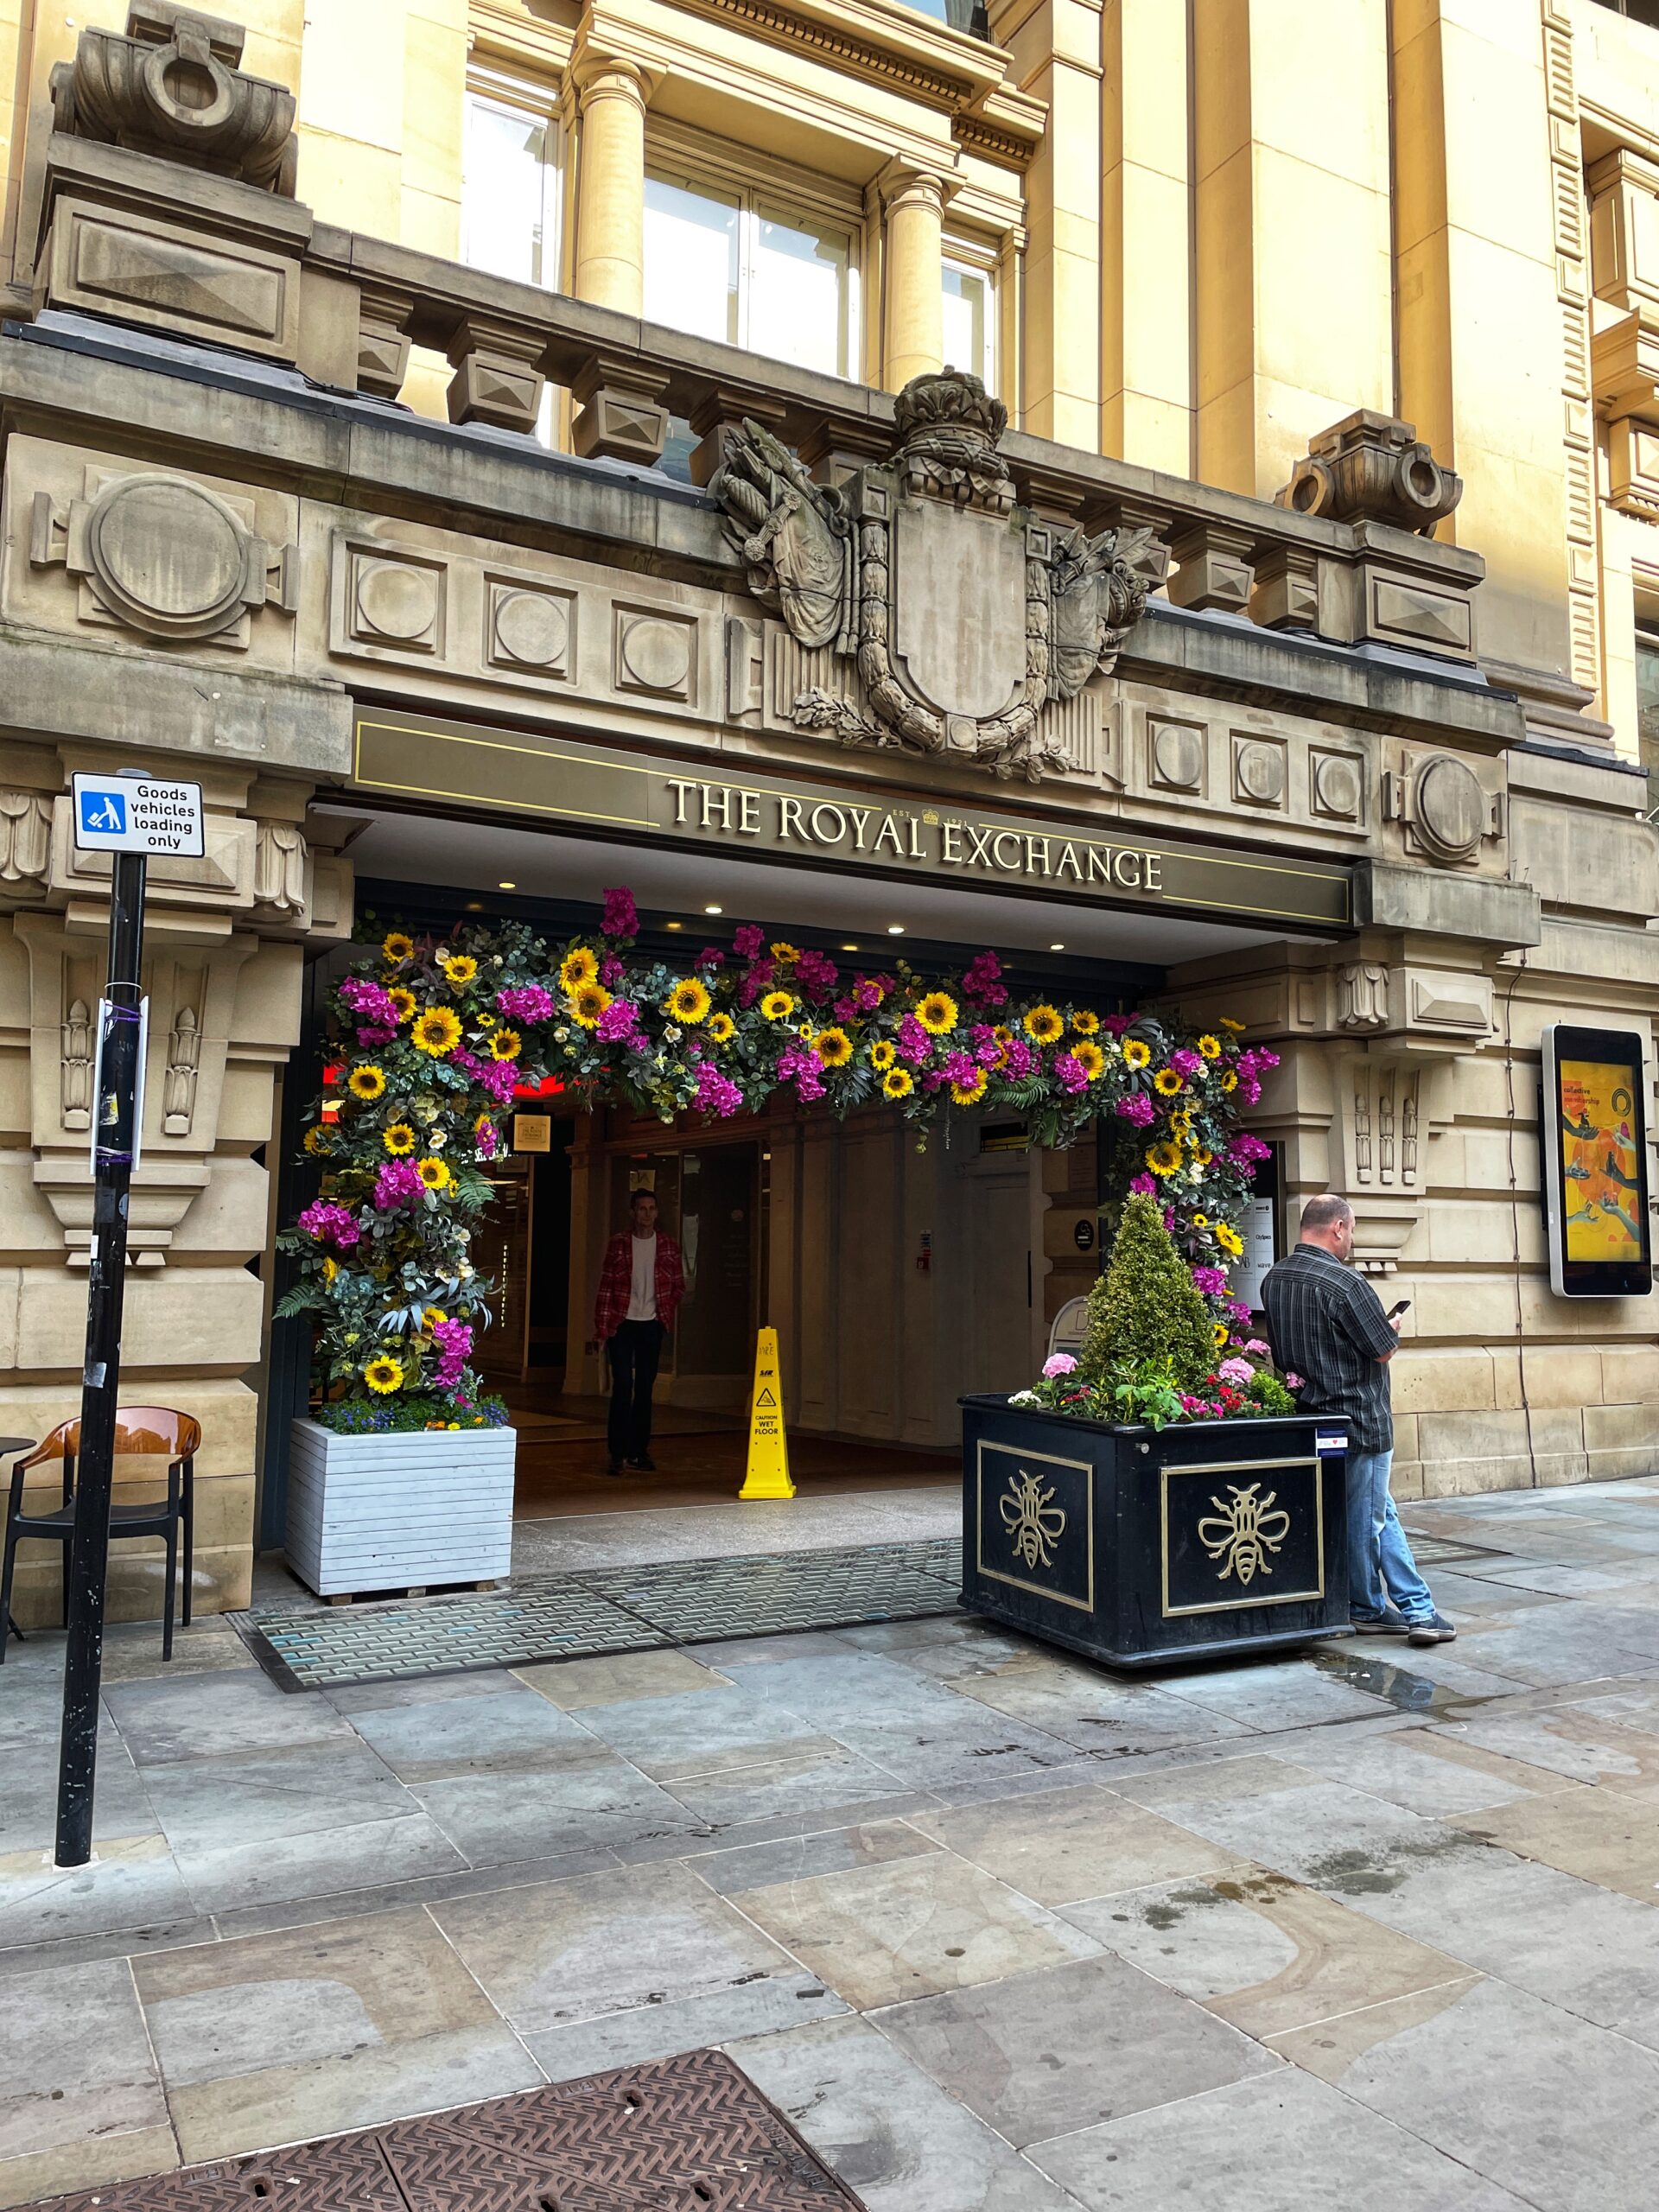 The Royal Exchange is taking part in the Manchester Flower Festival